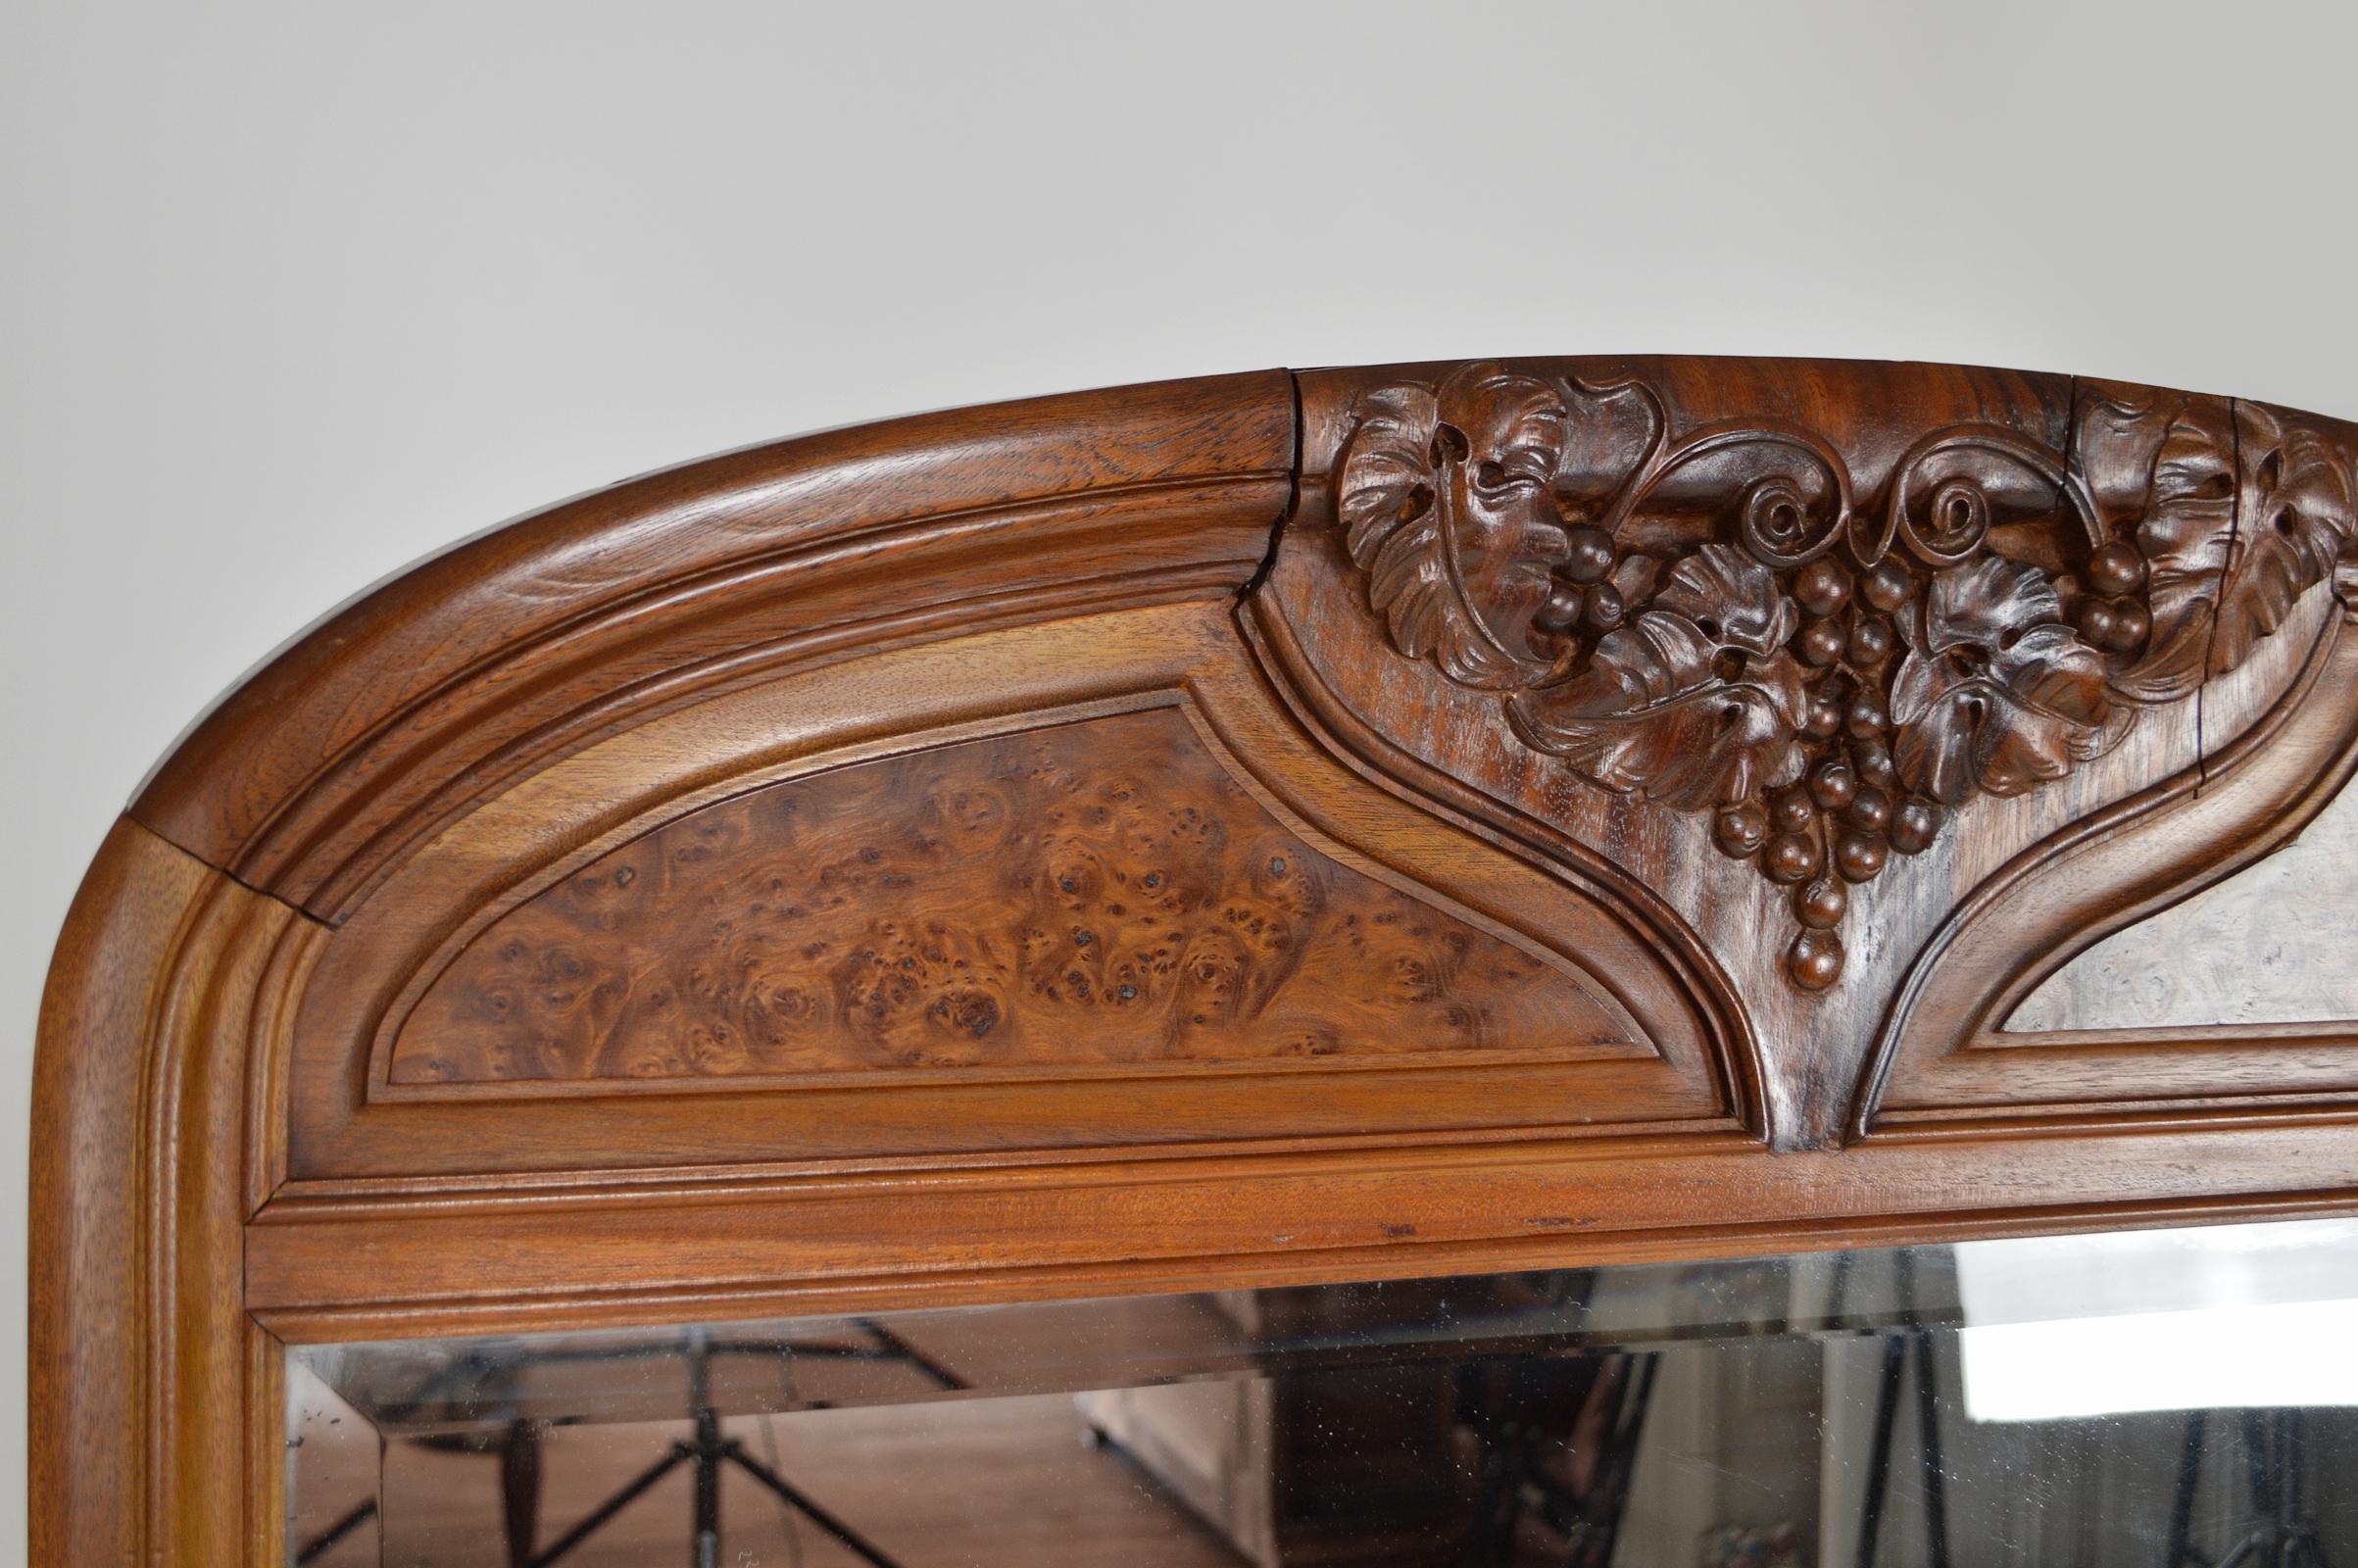 French Art Nouveau Fireplace Mantel Mirror, Carved Walnut and Burl, circa 1905 For Sale 3